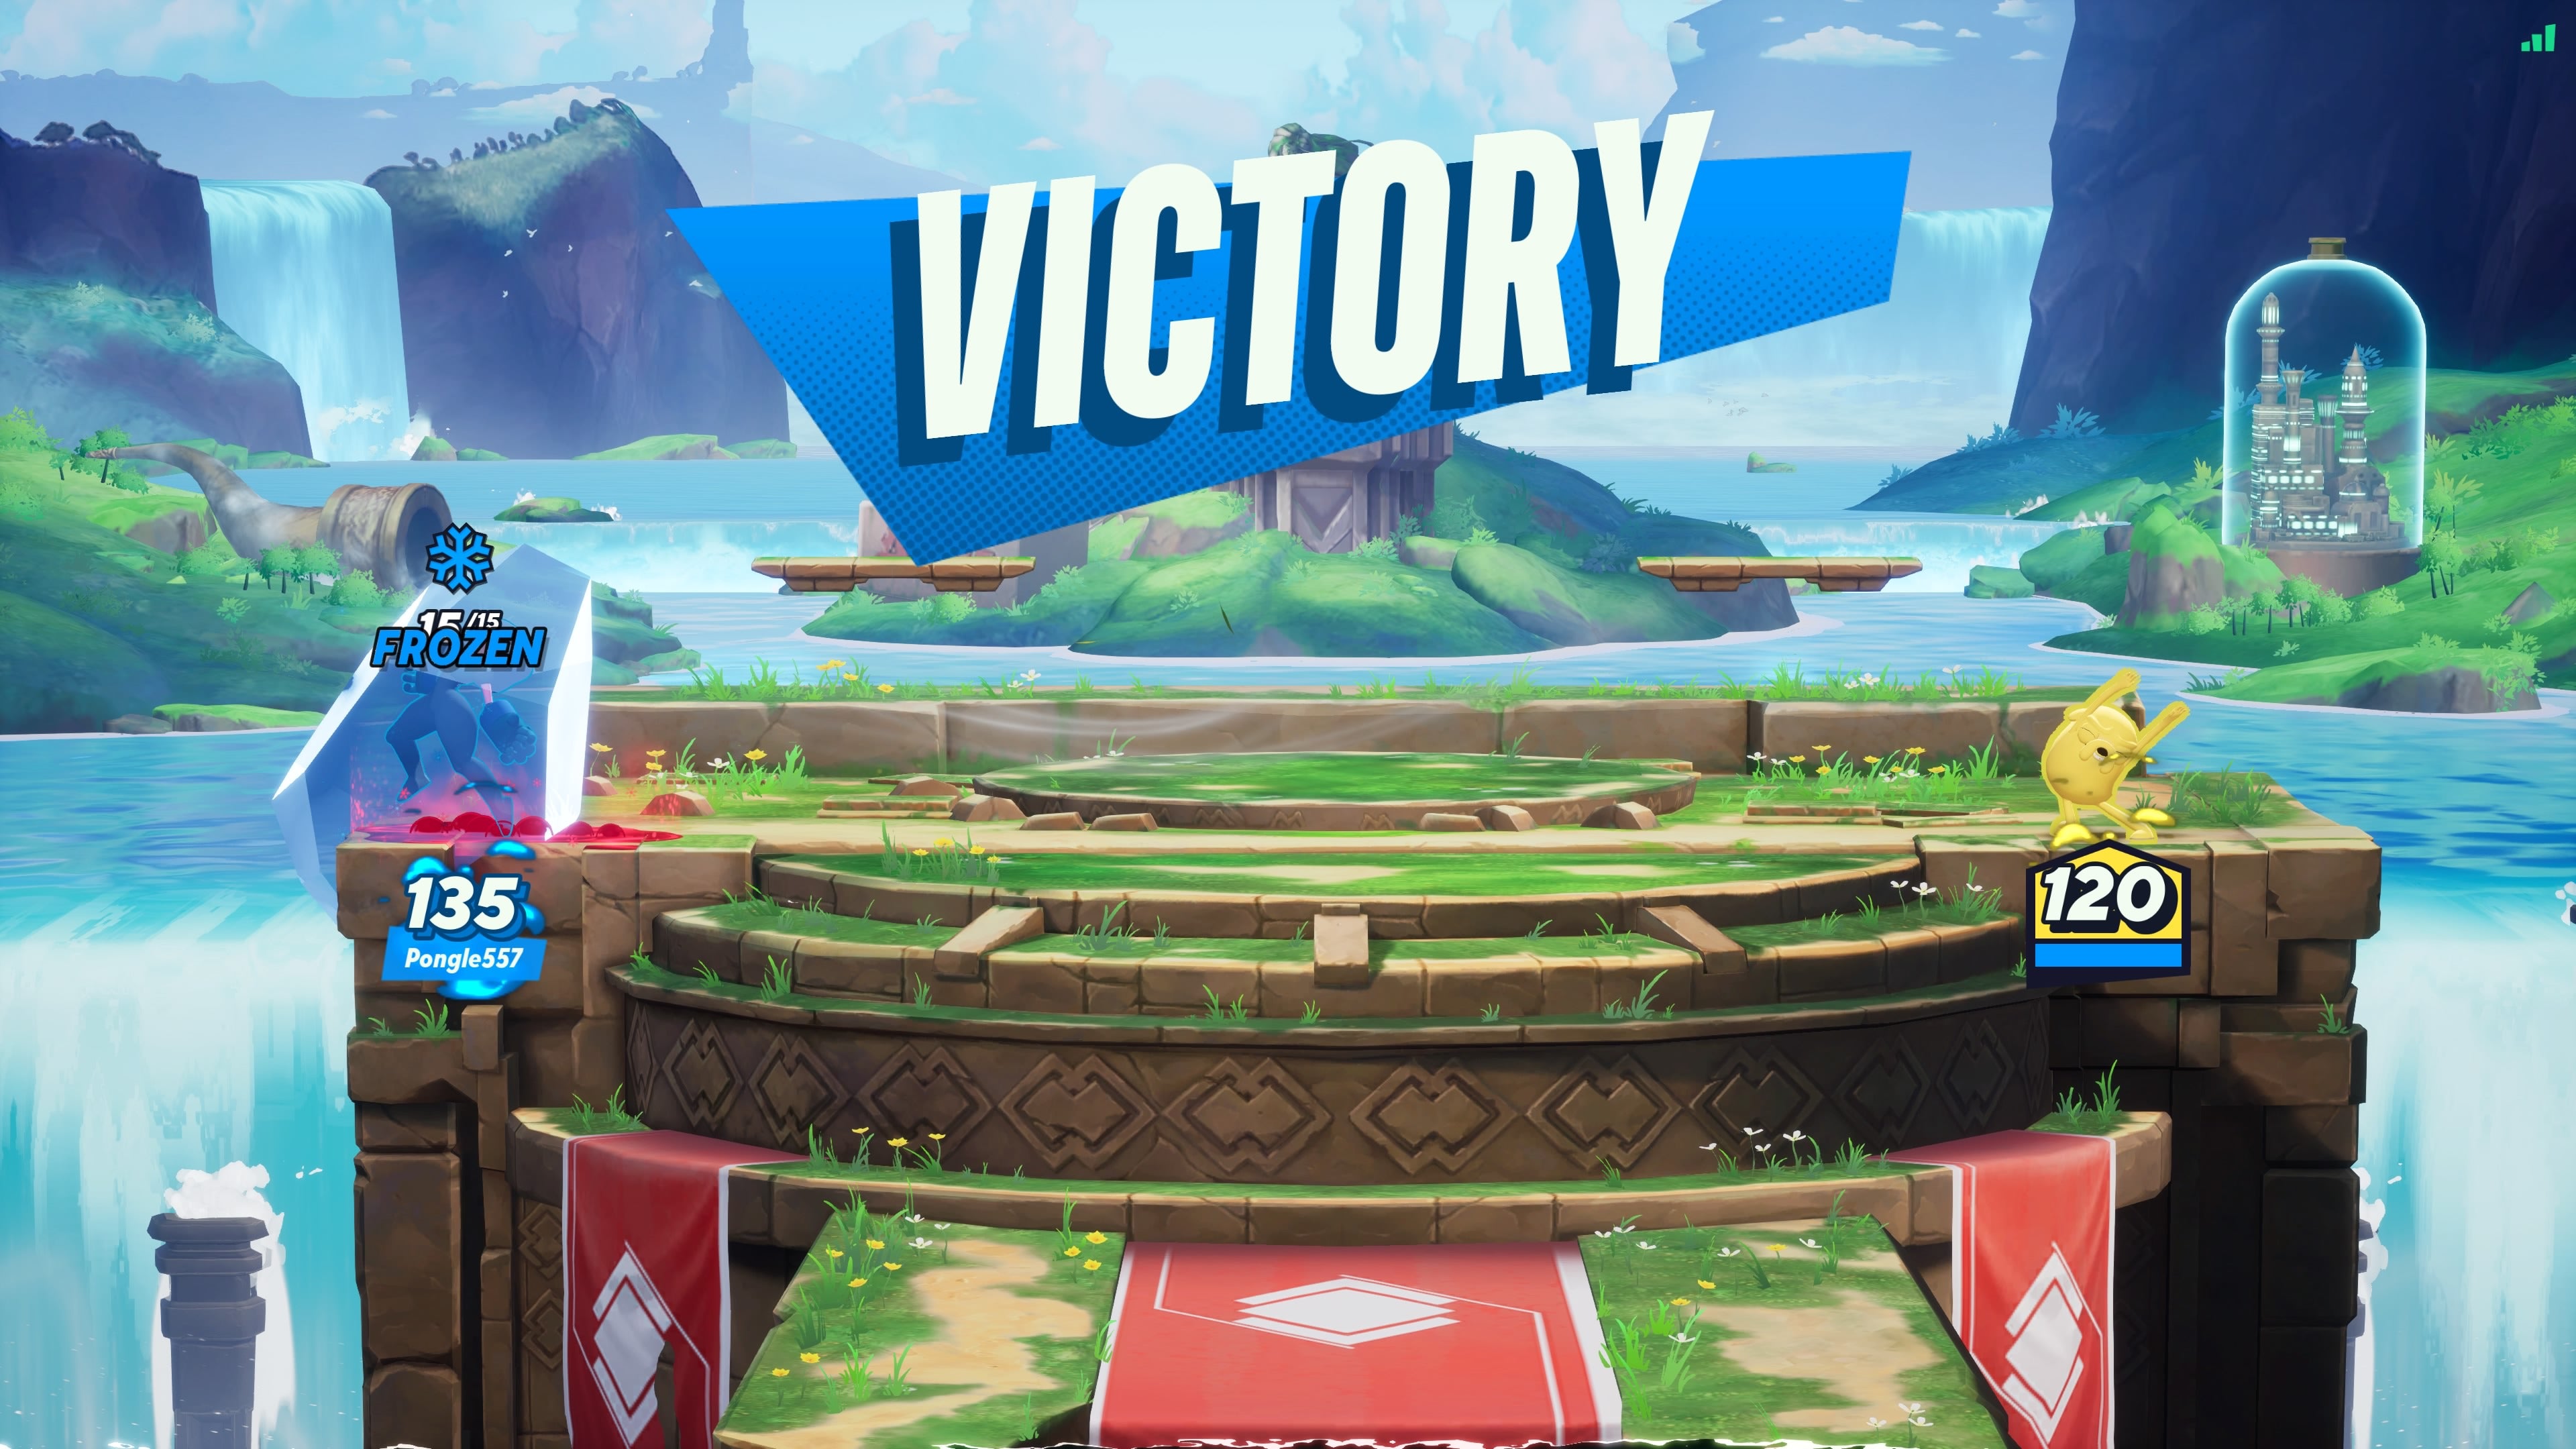 The victory screen in Multiversus.